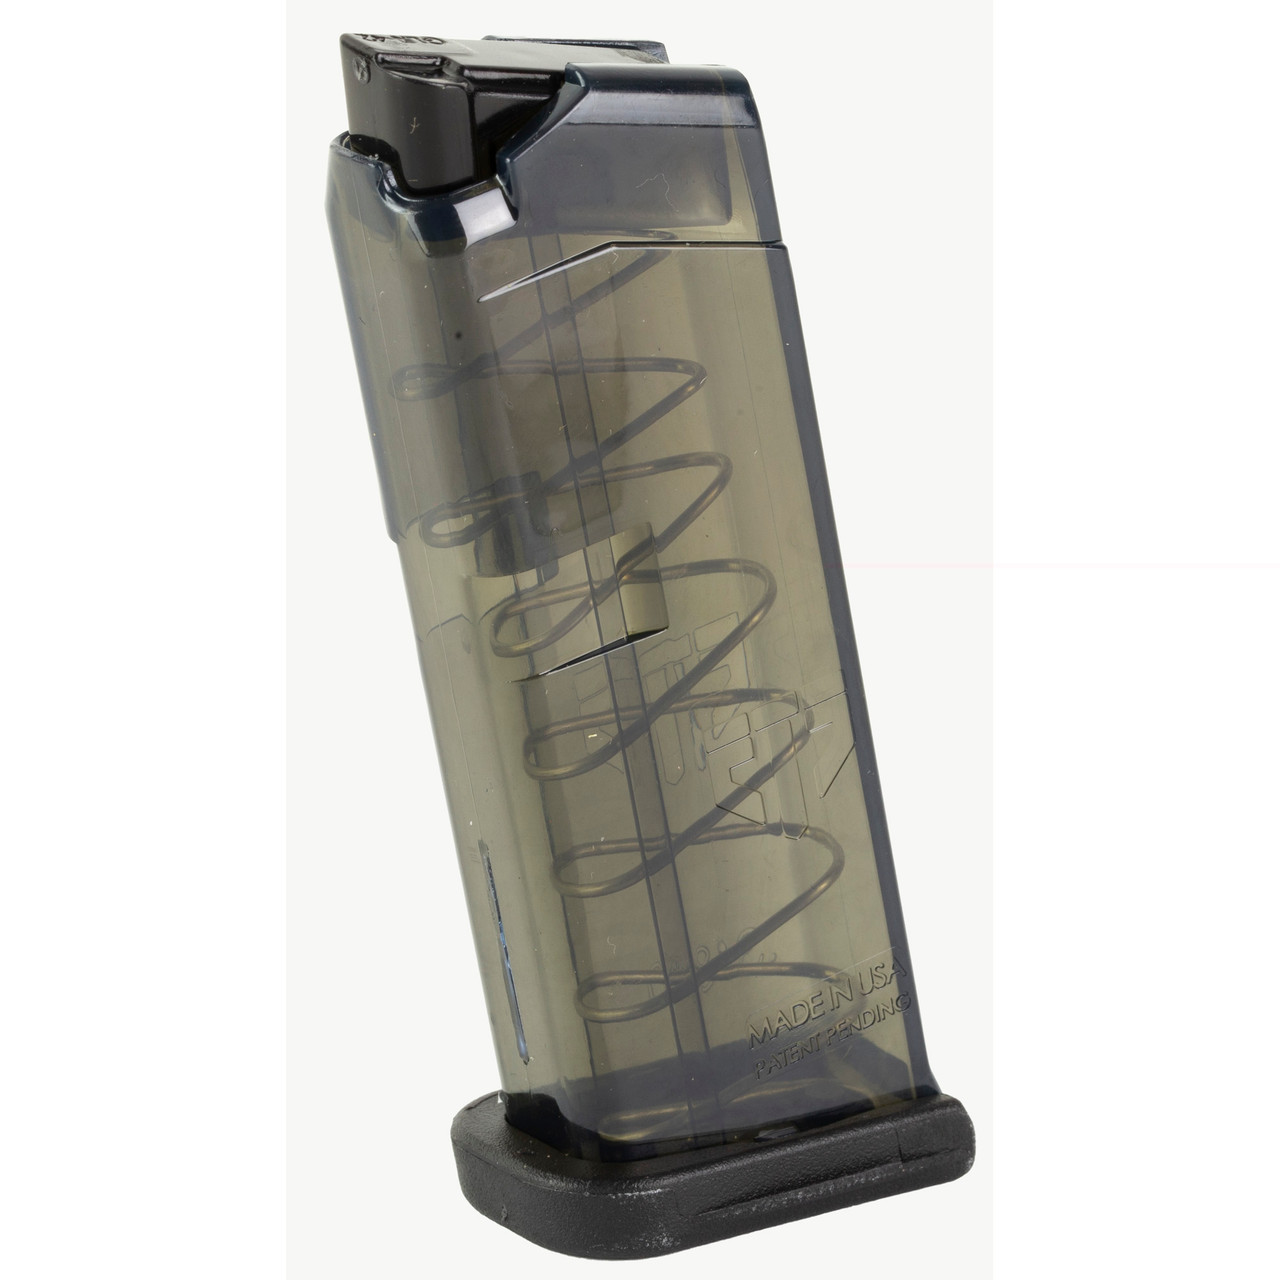 Elite Tactical Systems Group SMK-GLK-42 Magazine For Glk 42 380acp 7rd Crb Sm